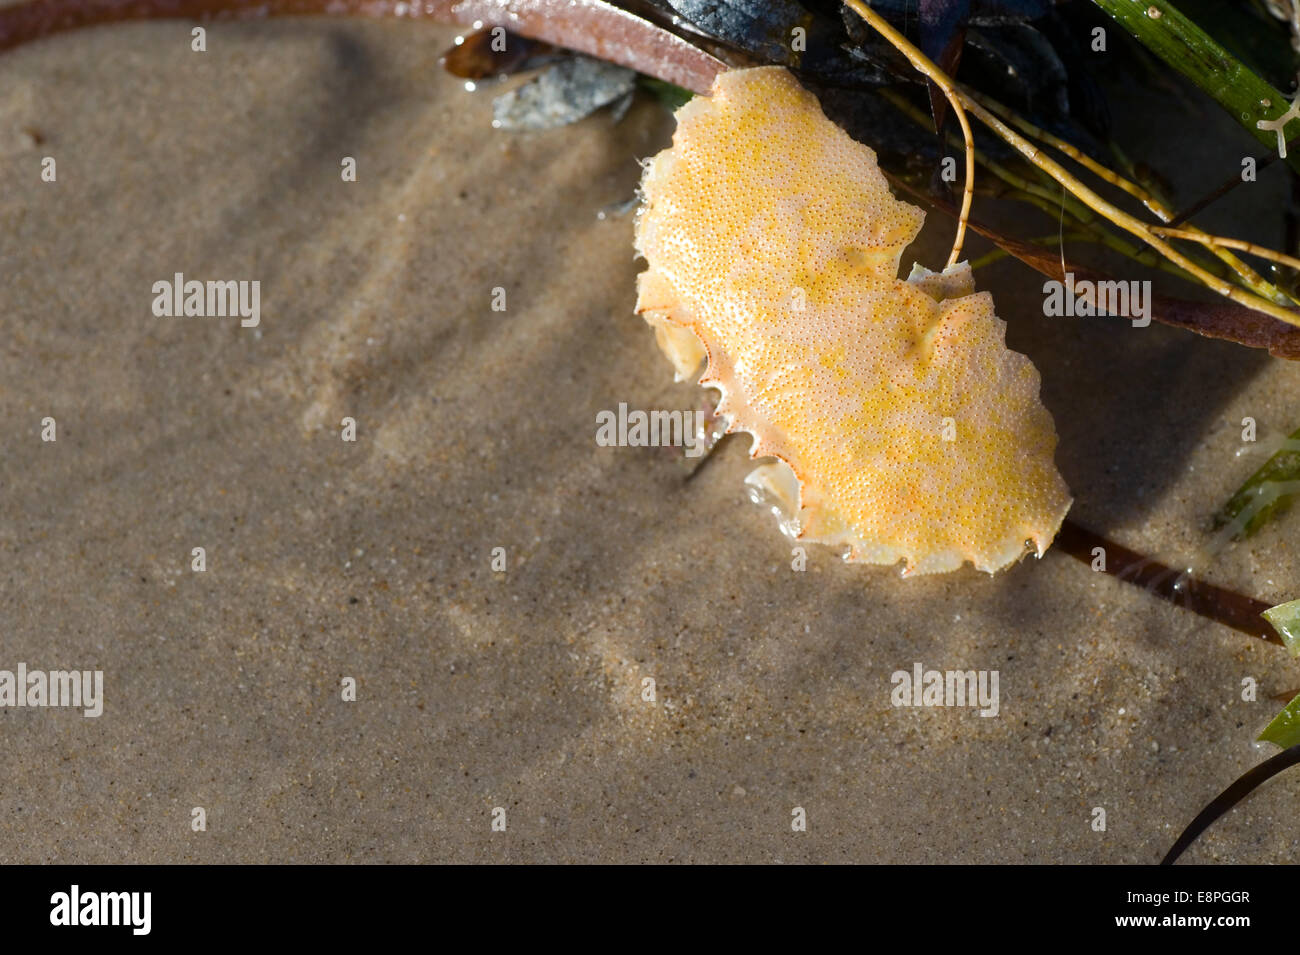 crab carapace on beach Stock Photo